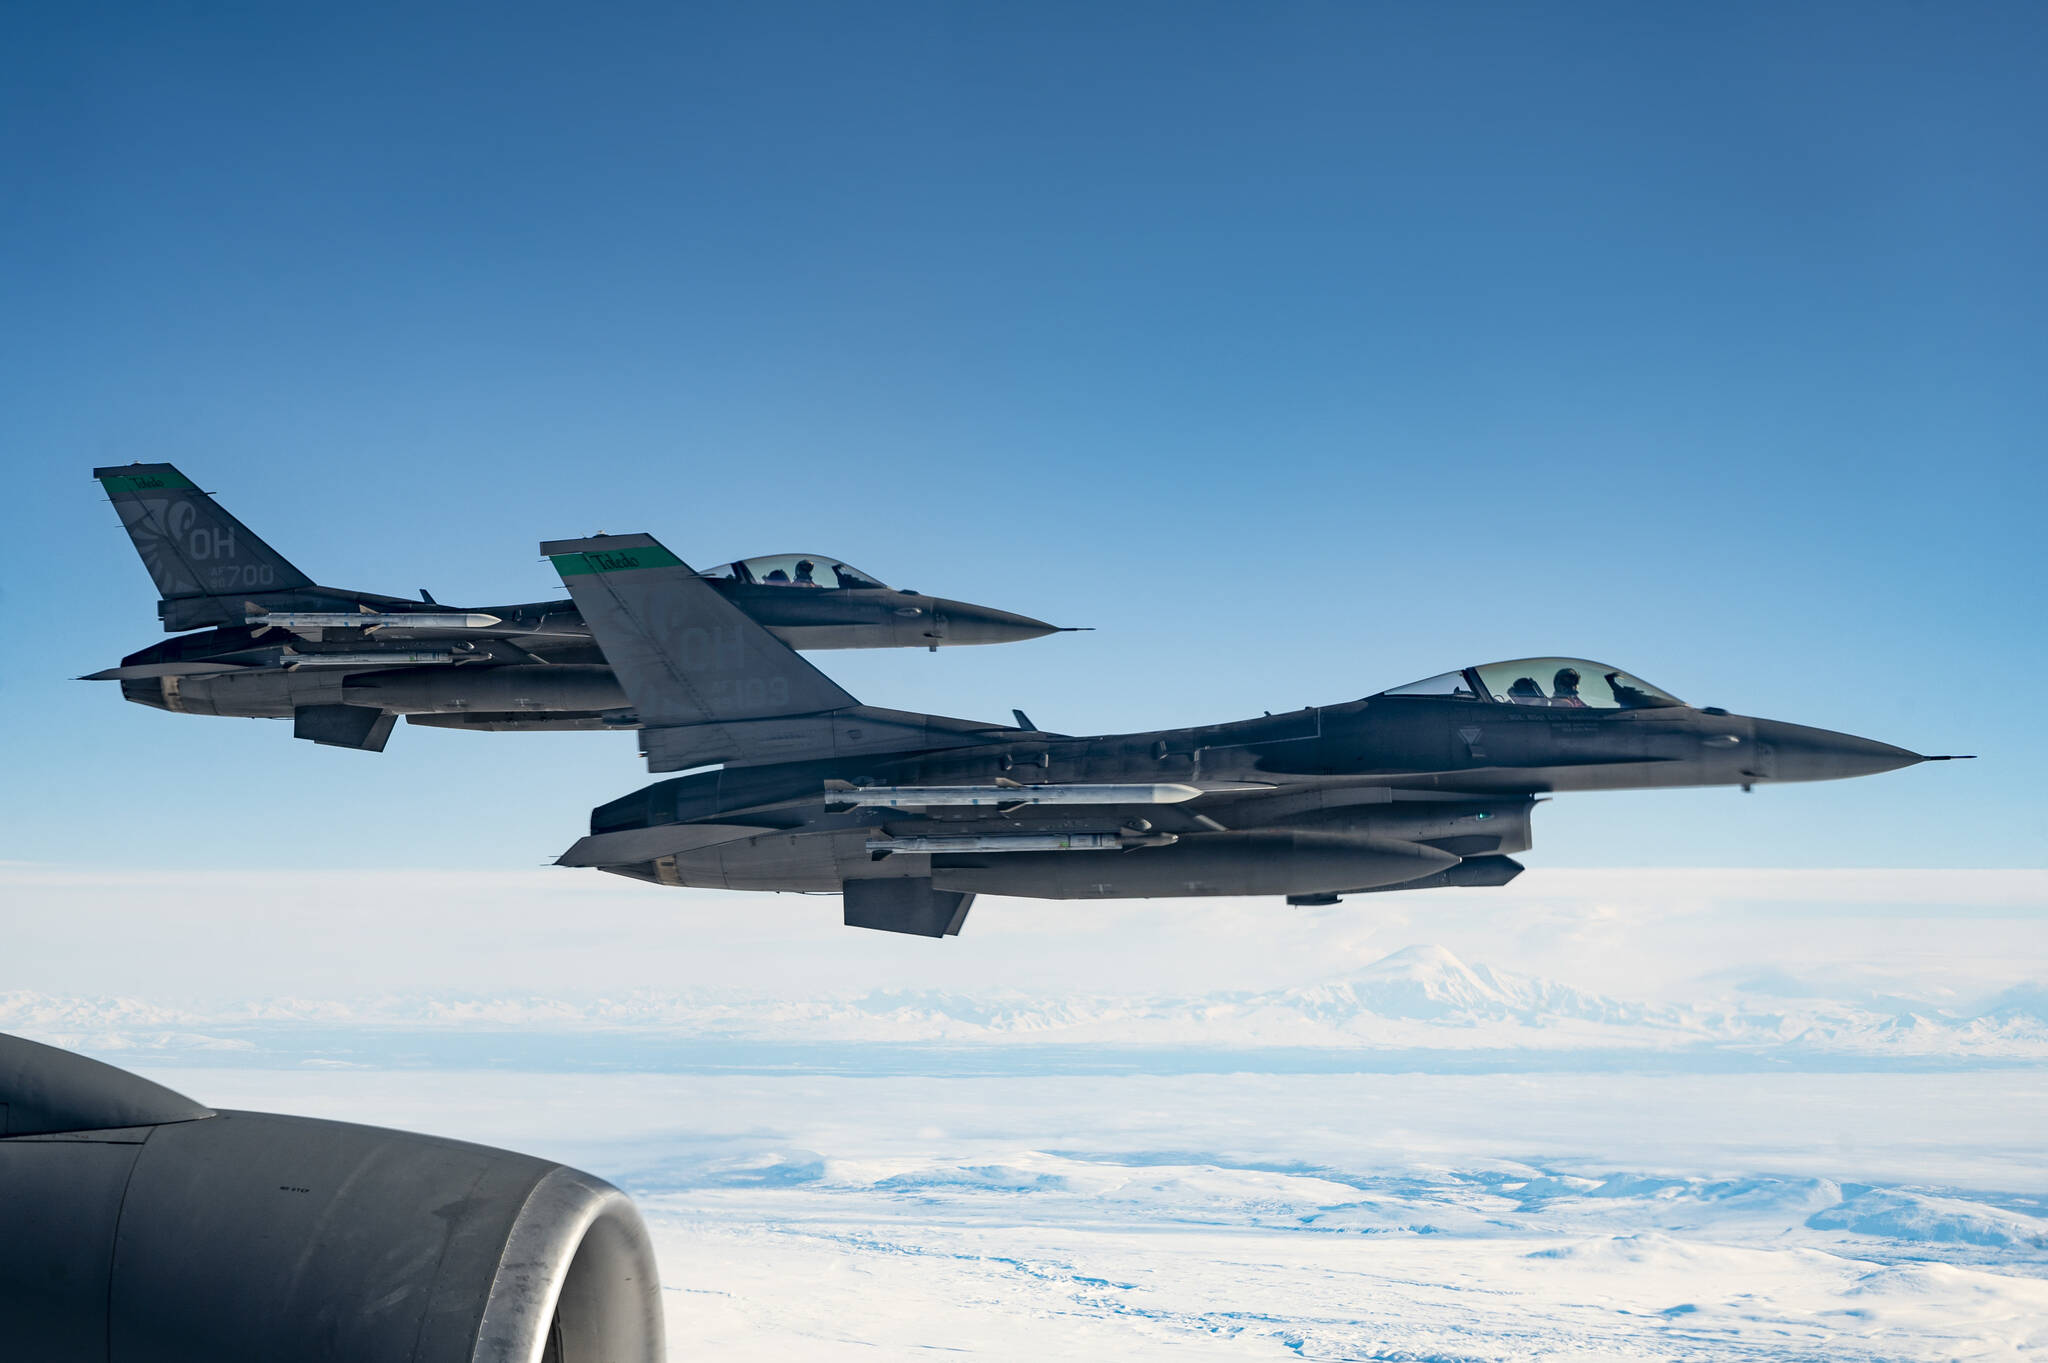 Two U.S. Air Force F-16 Fighting Falcons, assigned to the 180th Fighter Wing, fly in formation after being refueled by a KC-135 Stratotanker, assigned to the 97th Air Refueling Squadron, during U.S. Northern Command Exercise Arctic Edge 2022, March 15, 2022. (U.S. Air Force / Staff Sgt. Taylor Crul)